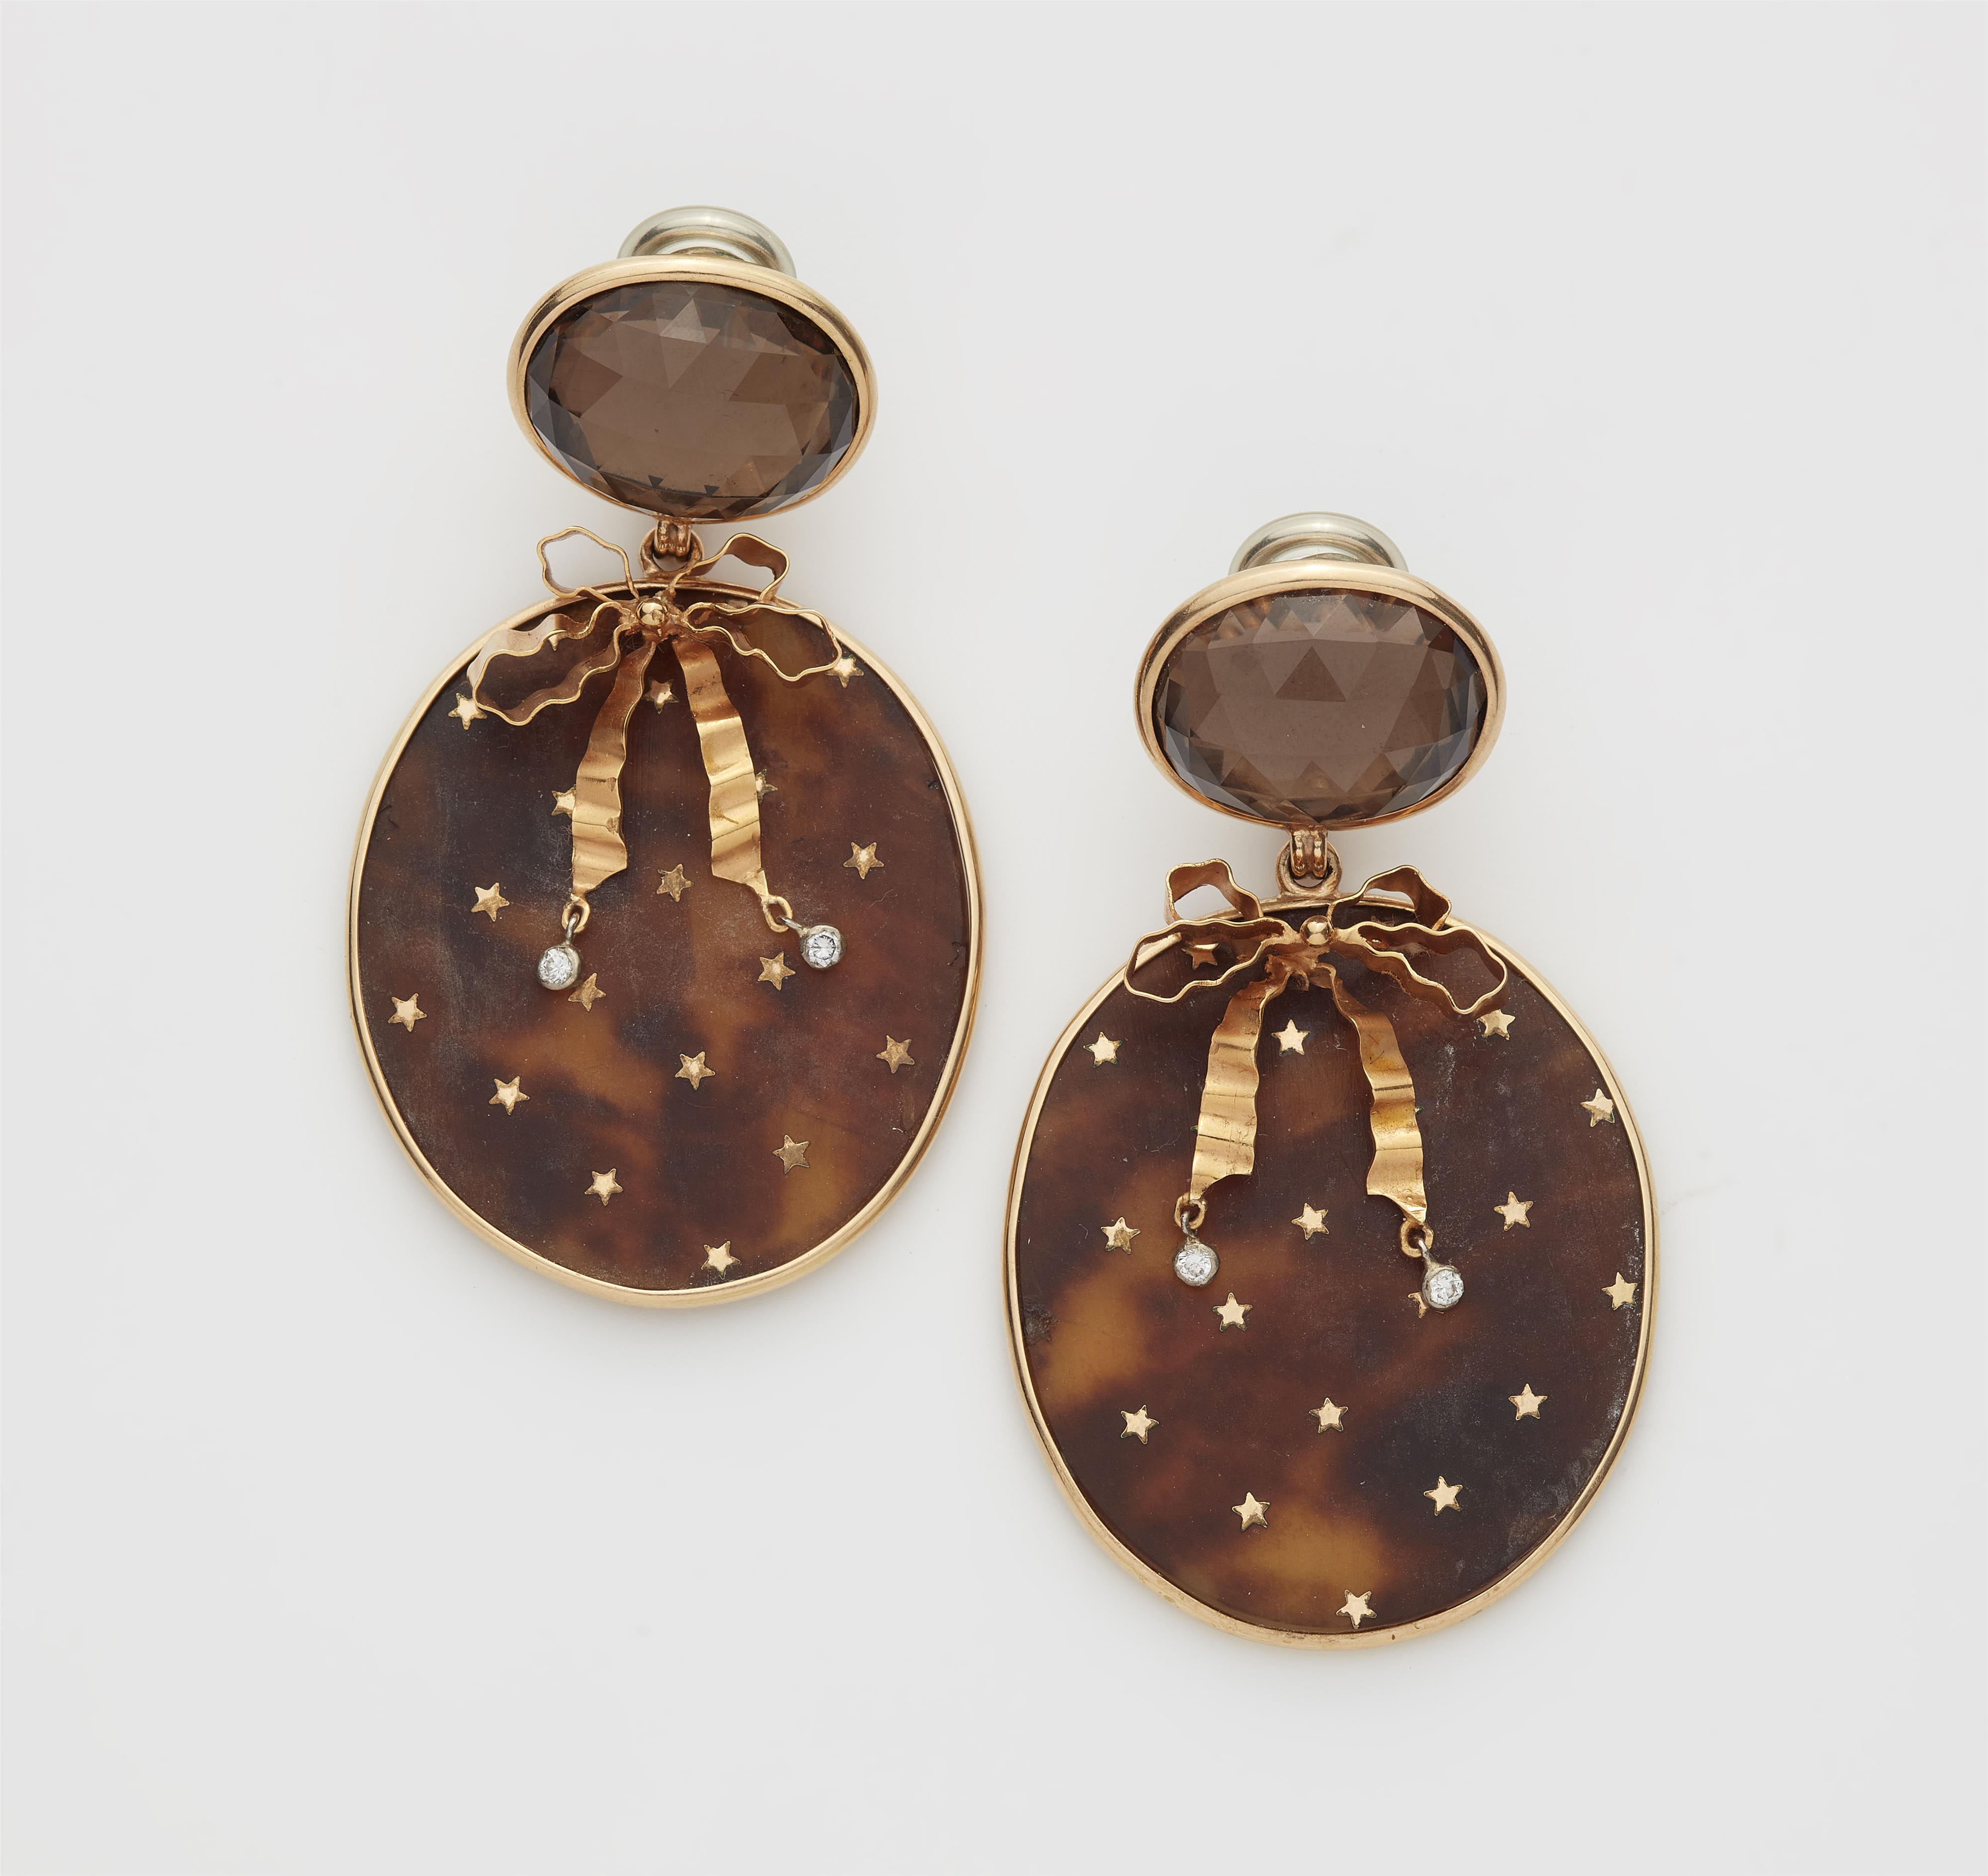 A pair of custom made 14k gold silver and smoky quartz bow earrings using parts of a 19th century tortoiseshell spectacle case with gold piqué point. - image-1